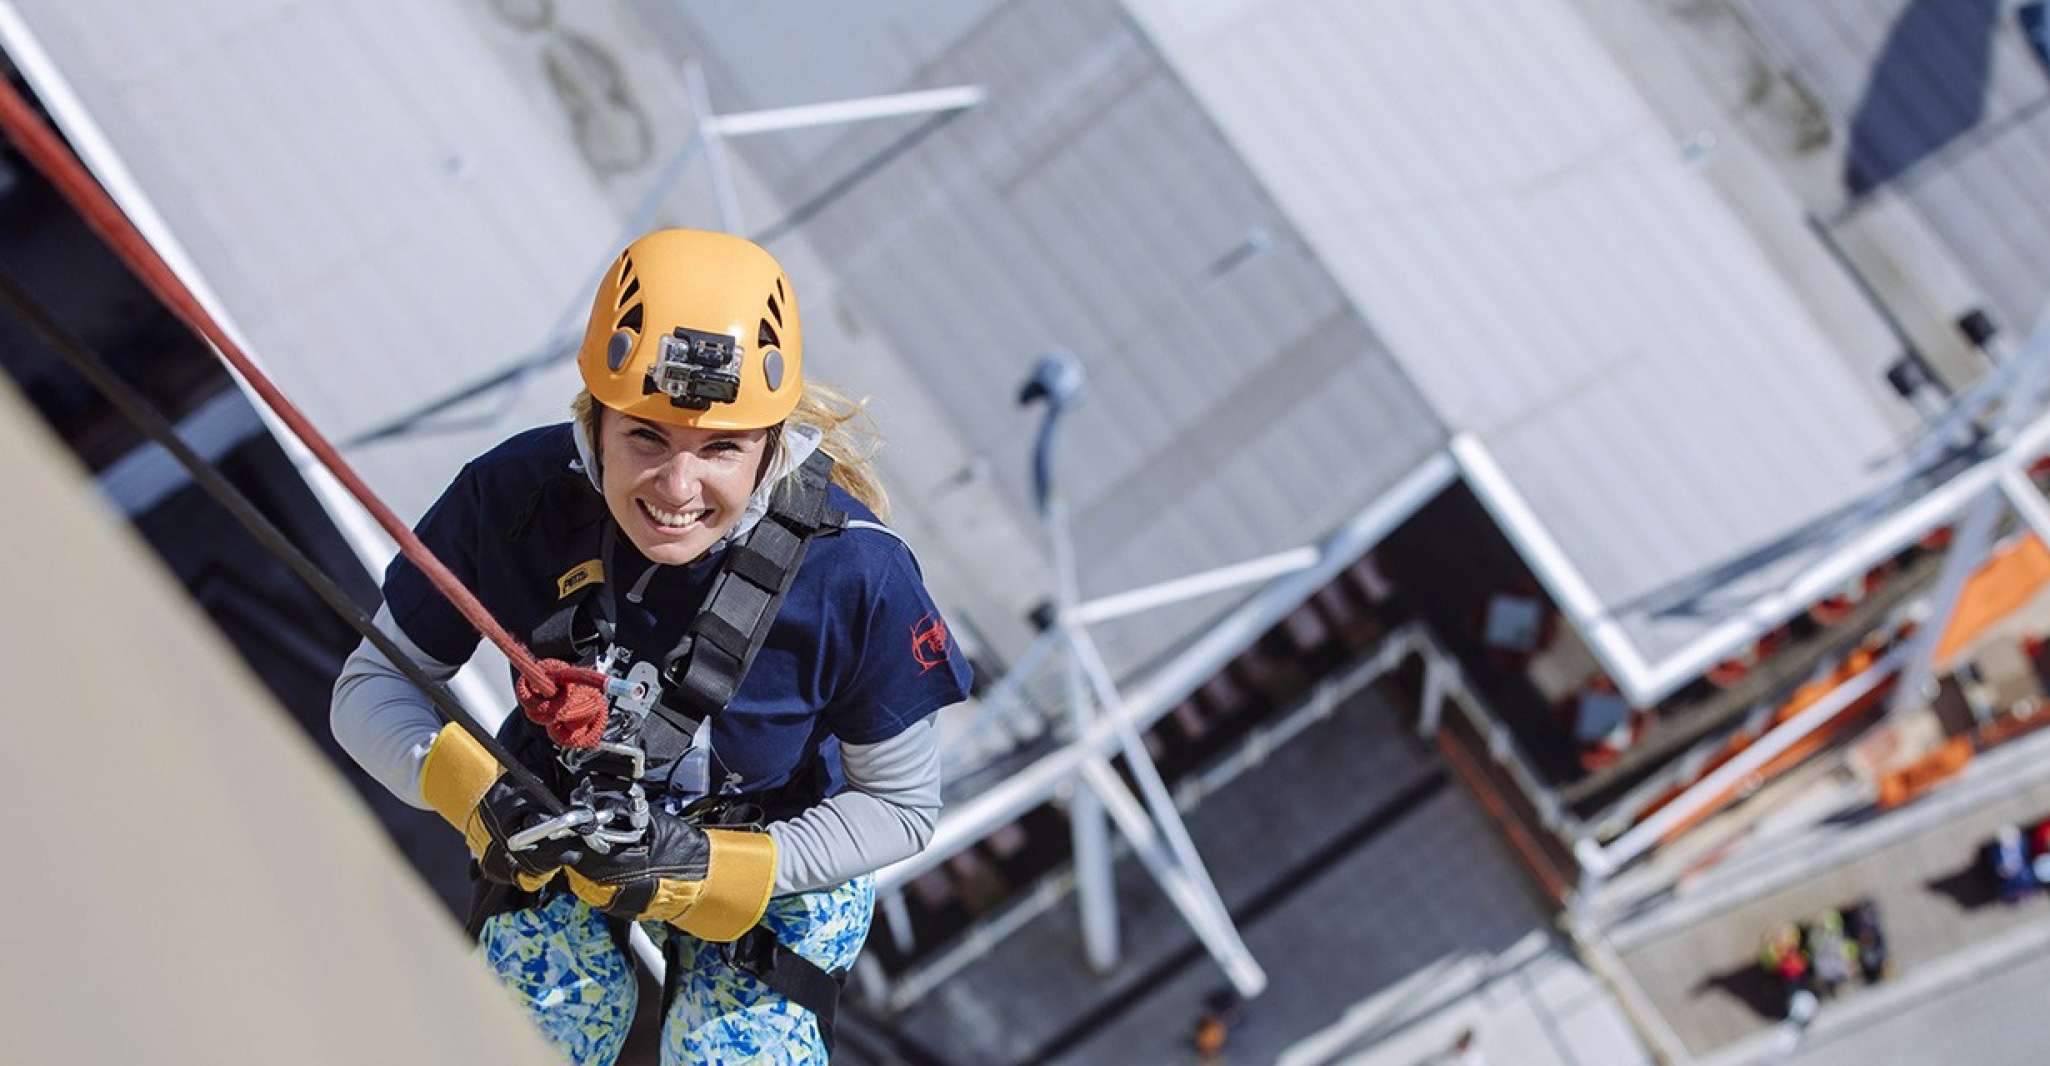 Portsmouth, Spinnaker Tower Abseiling Experience - Housity